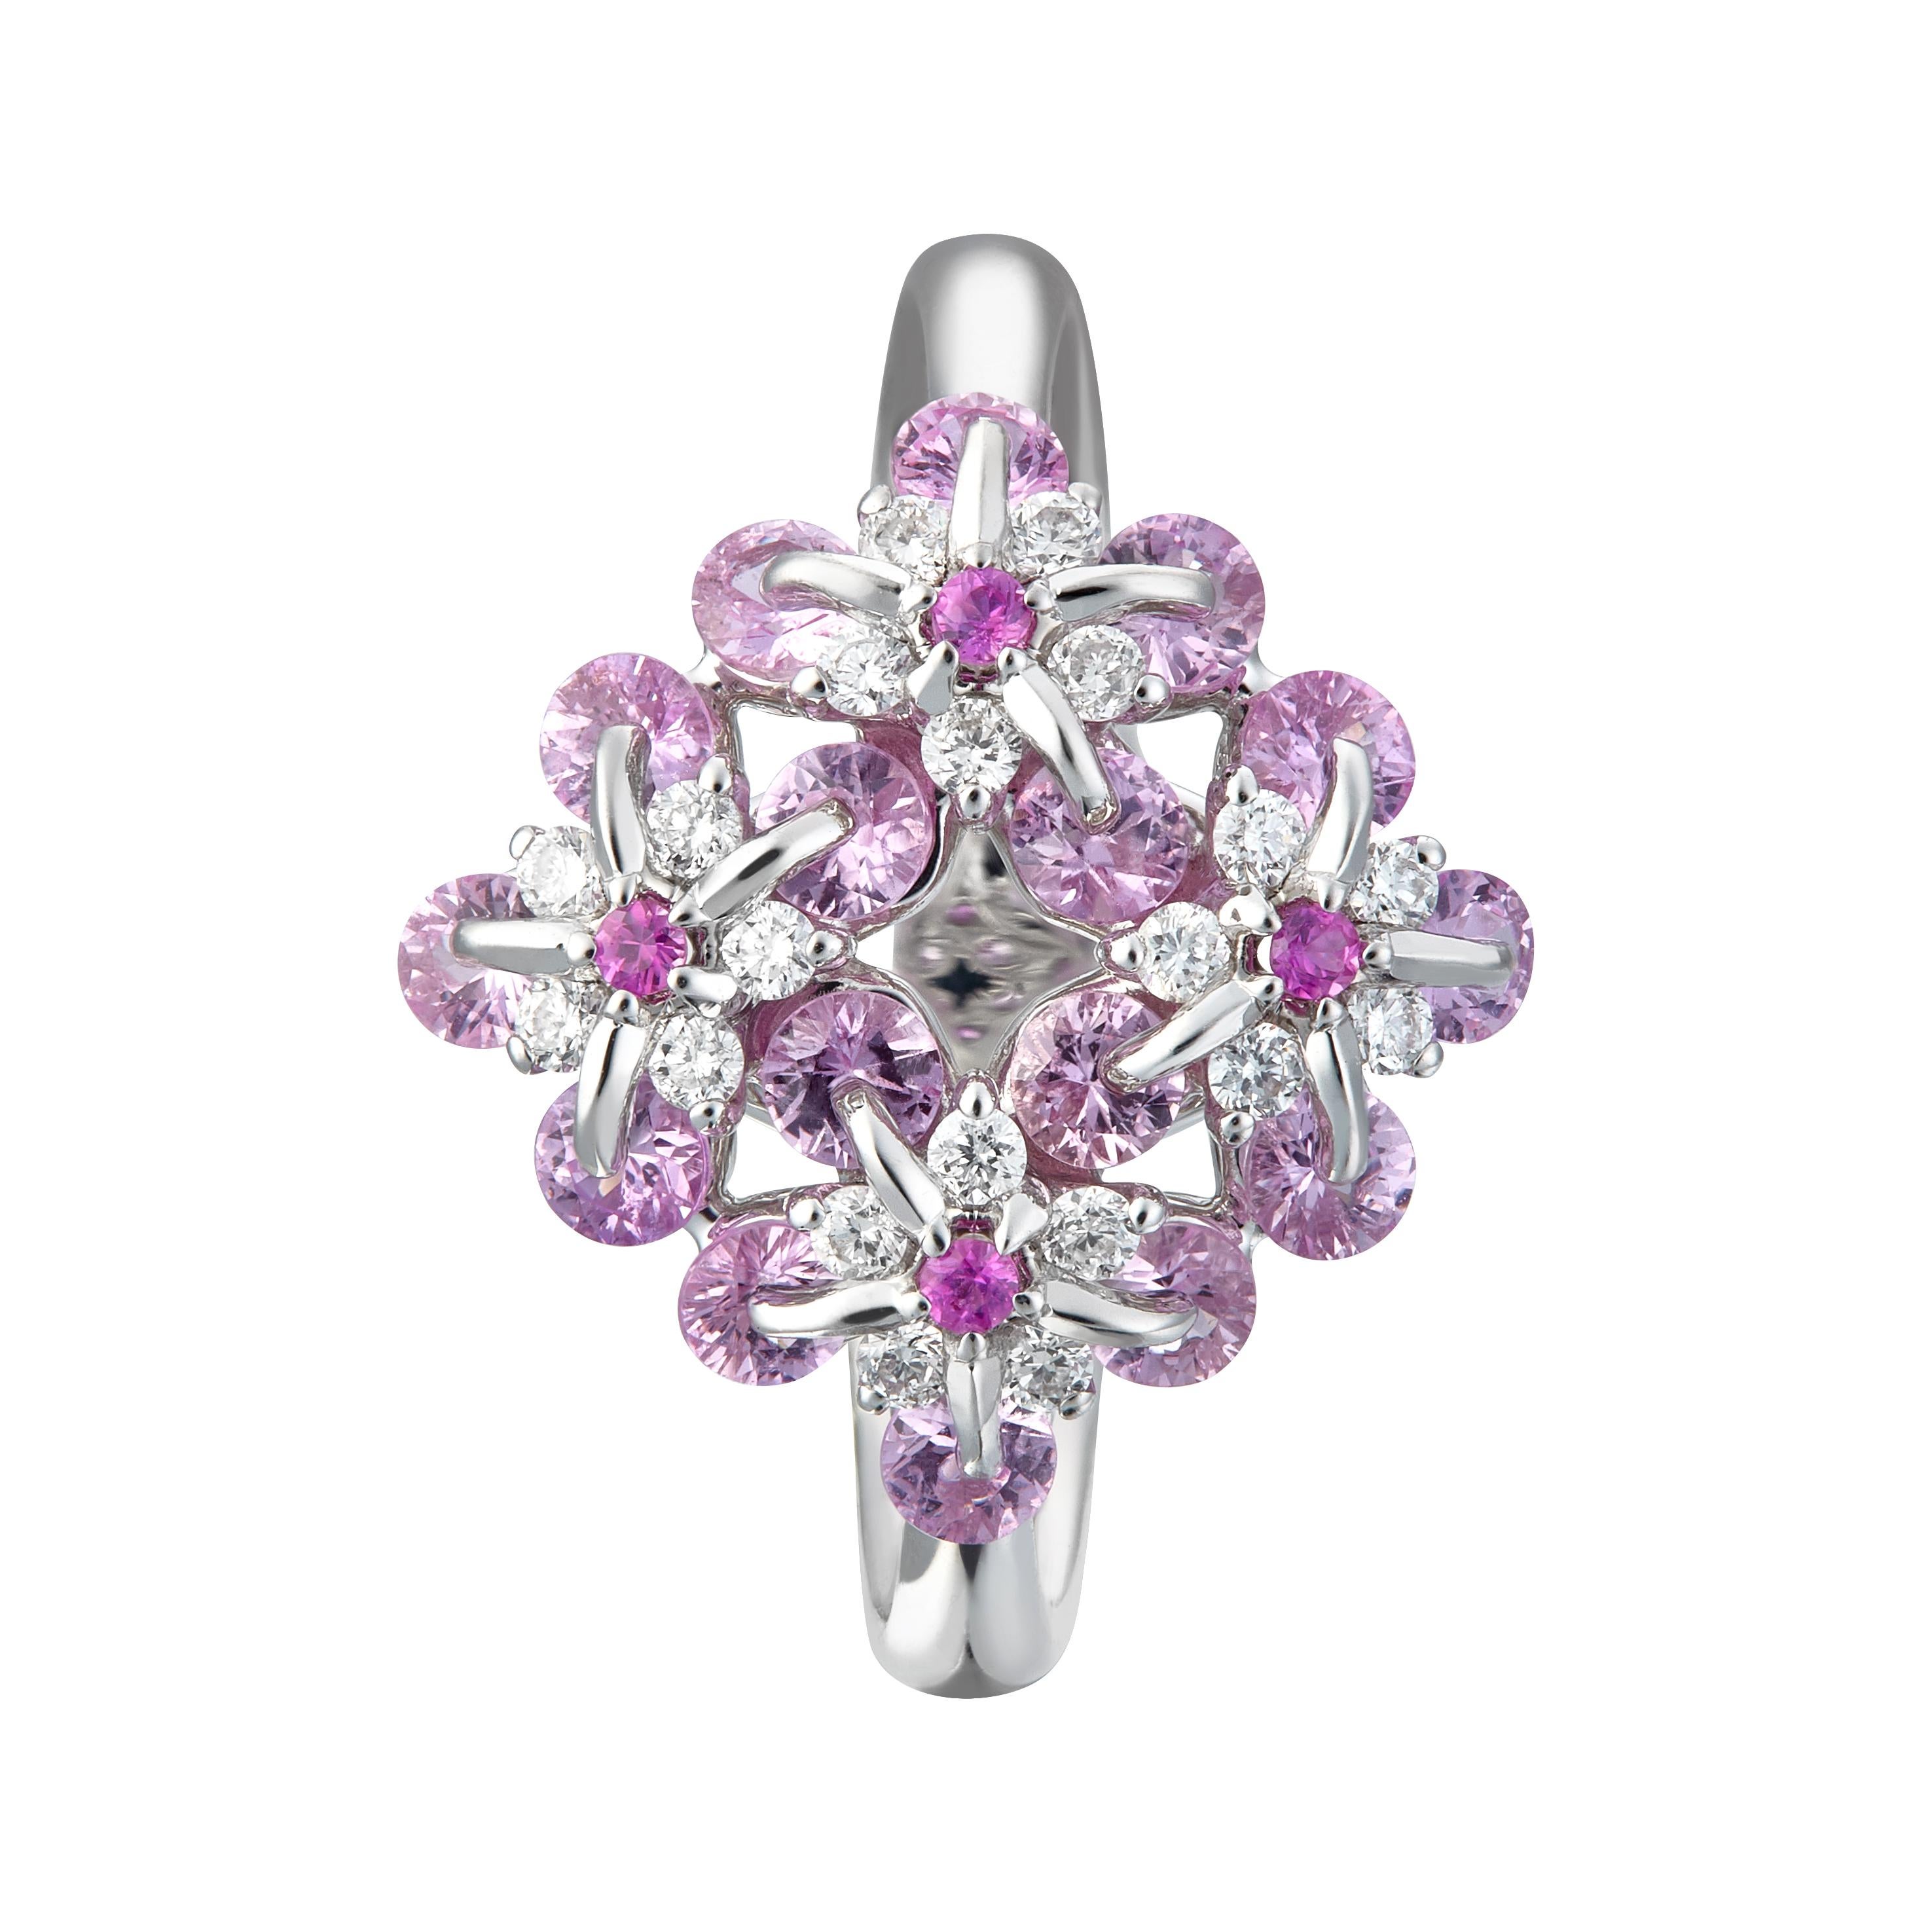 Symbol of rememberence and eternal love, Forget Me Not flower has become an everlasting flower made in 18karat white gold, diamonds and pink sapphires. Mounted in Waltzing Brilliance technology, this lively ring will be a precious rememberance  of 